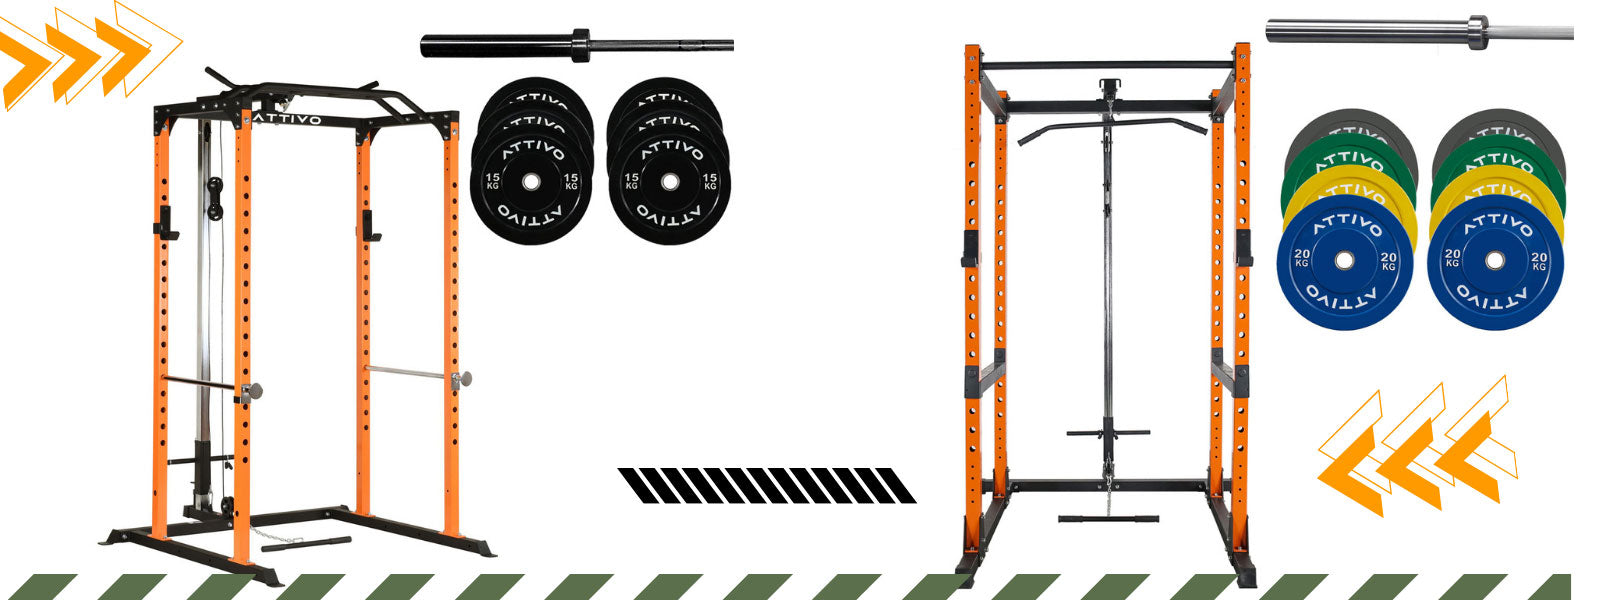 Choosing the right Garage Gym package/combo